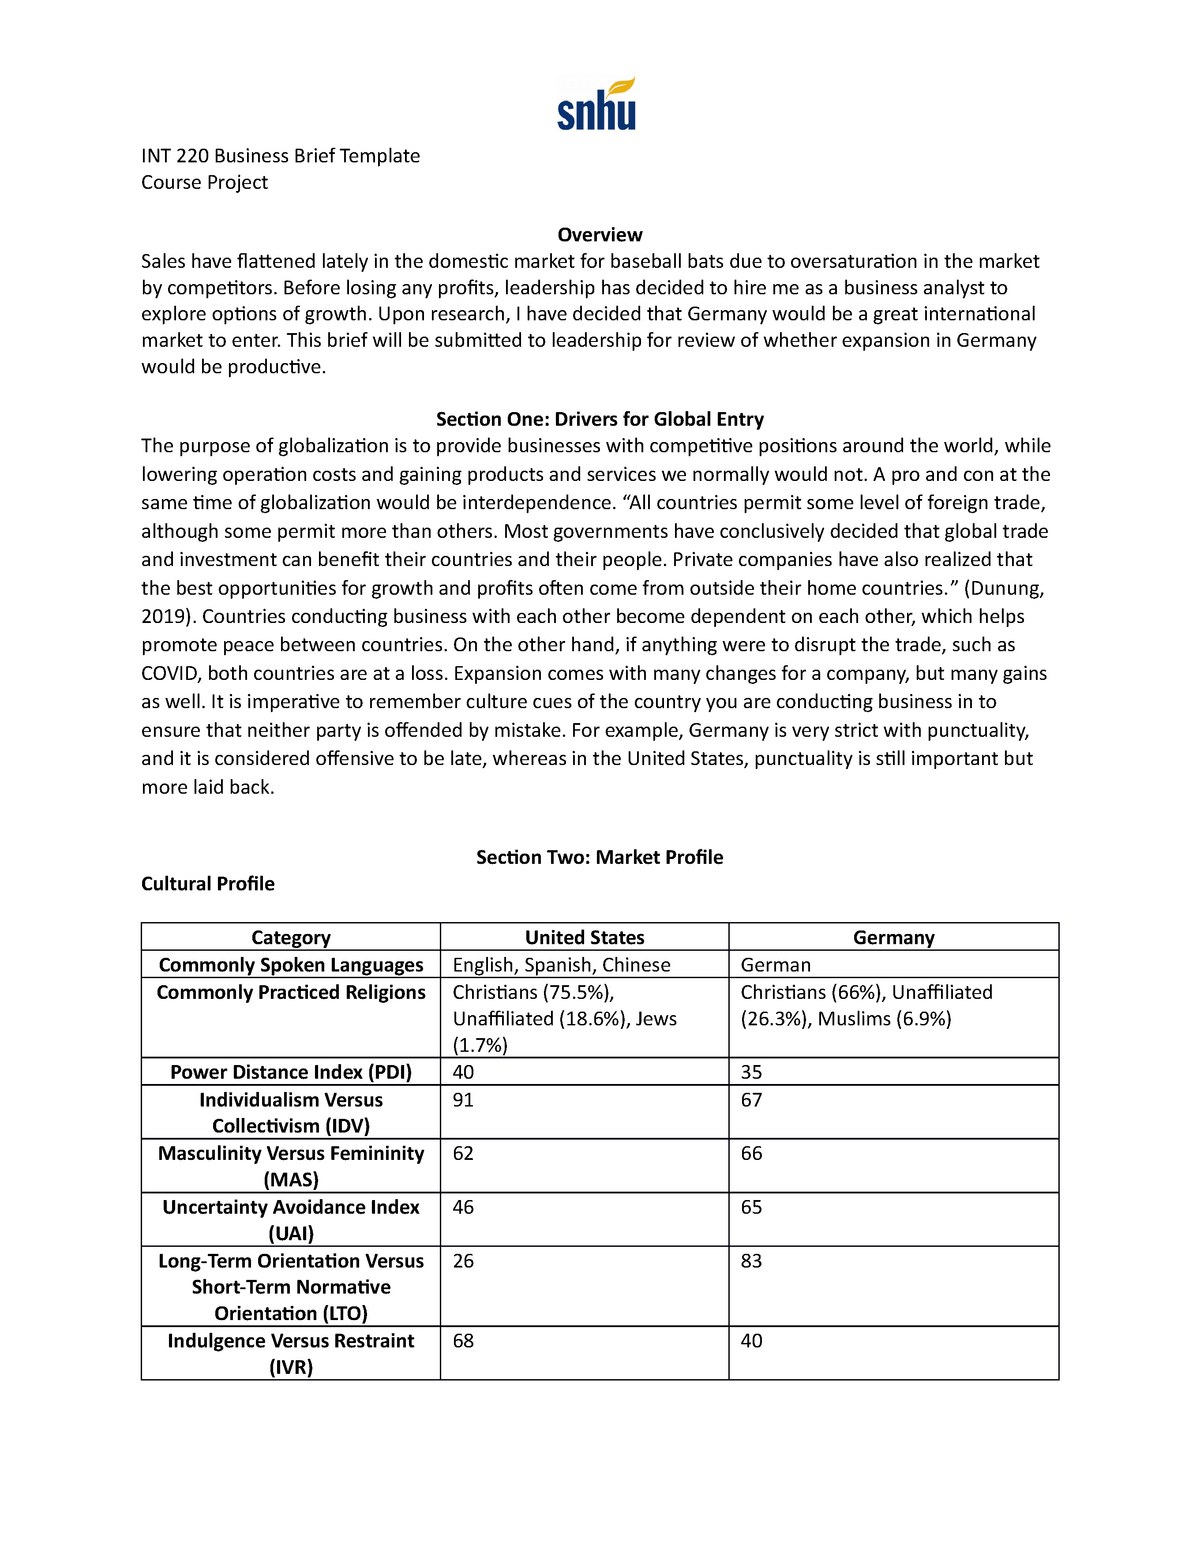 INT 220 Business Brief INT 220 Business Brief Template Course Project